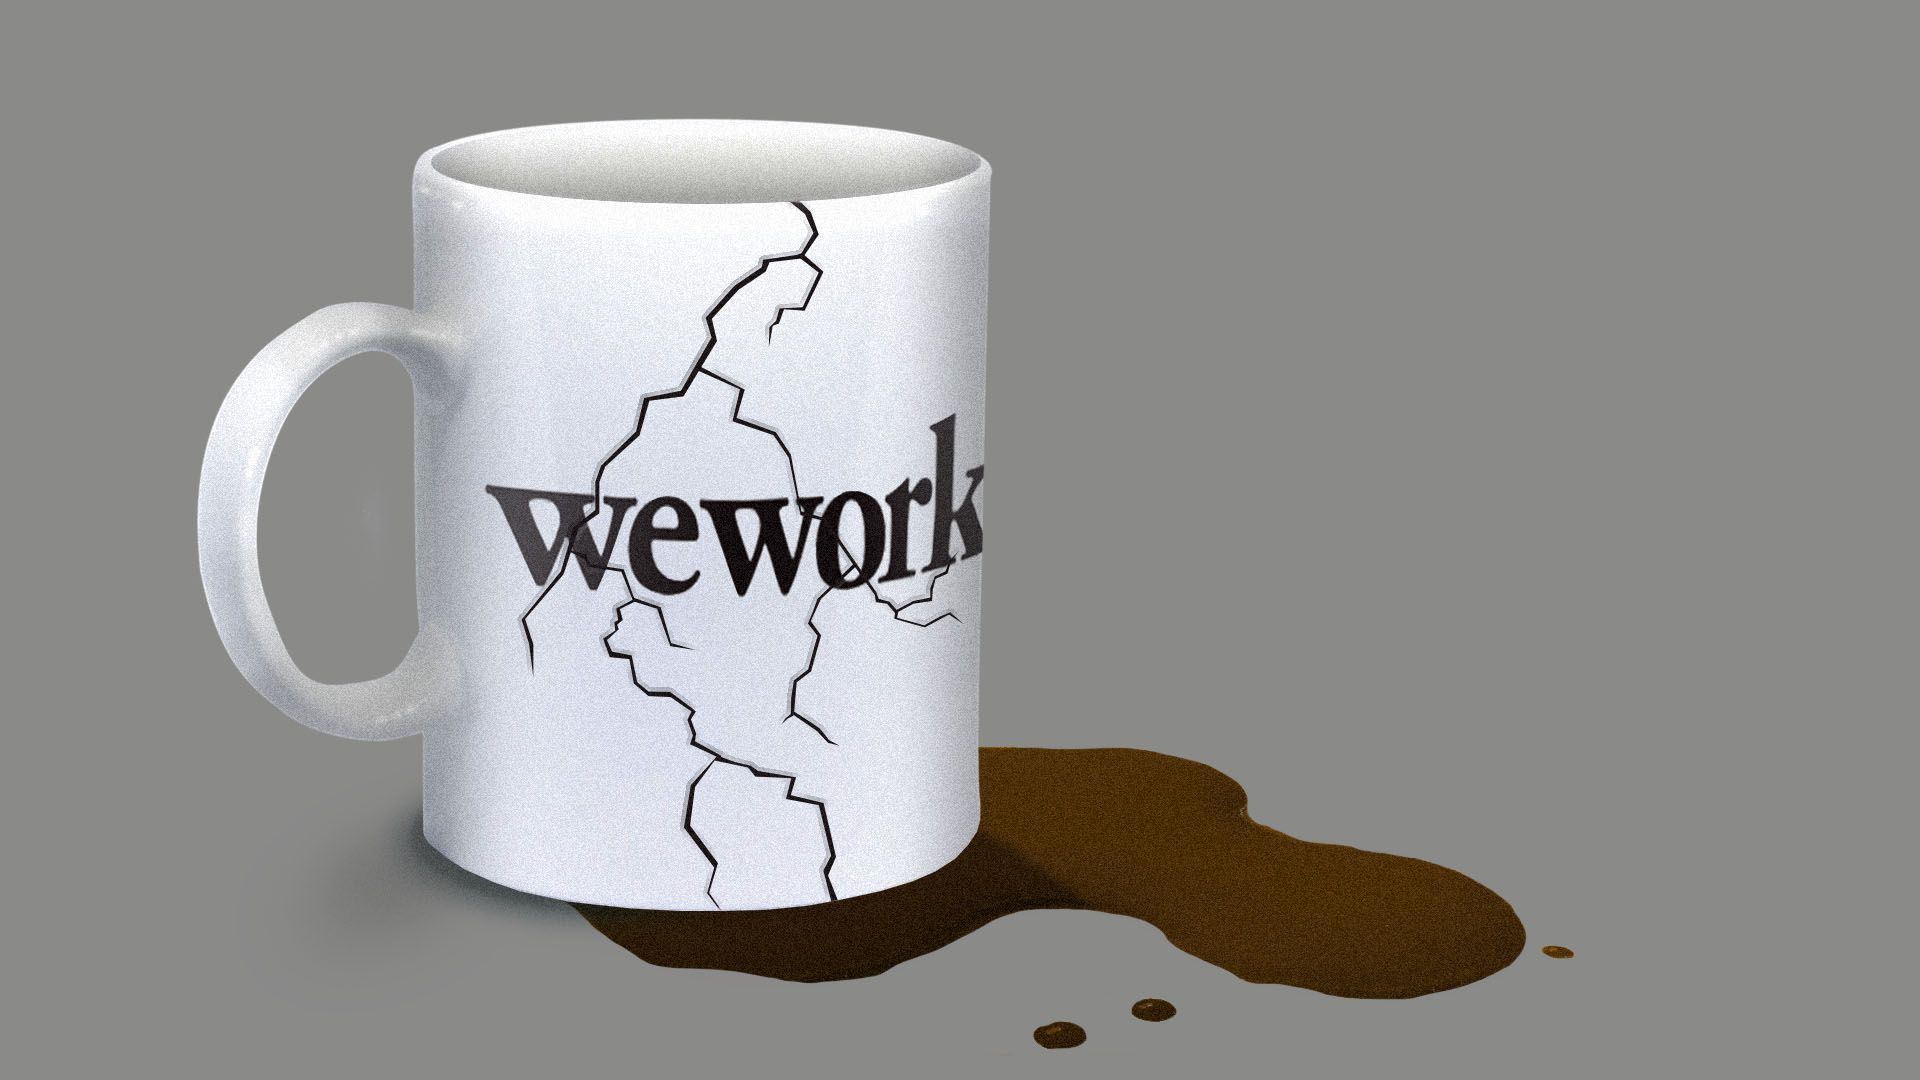 illustration of a wework coffee mug that is cracked